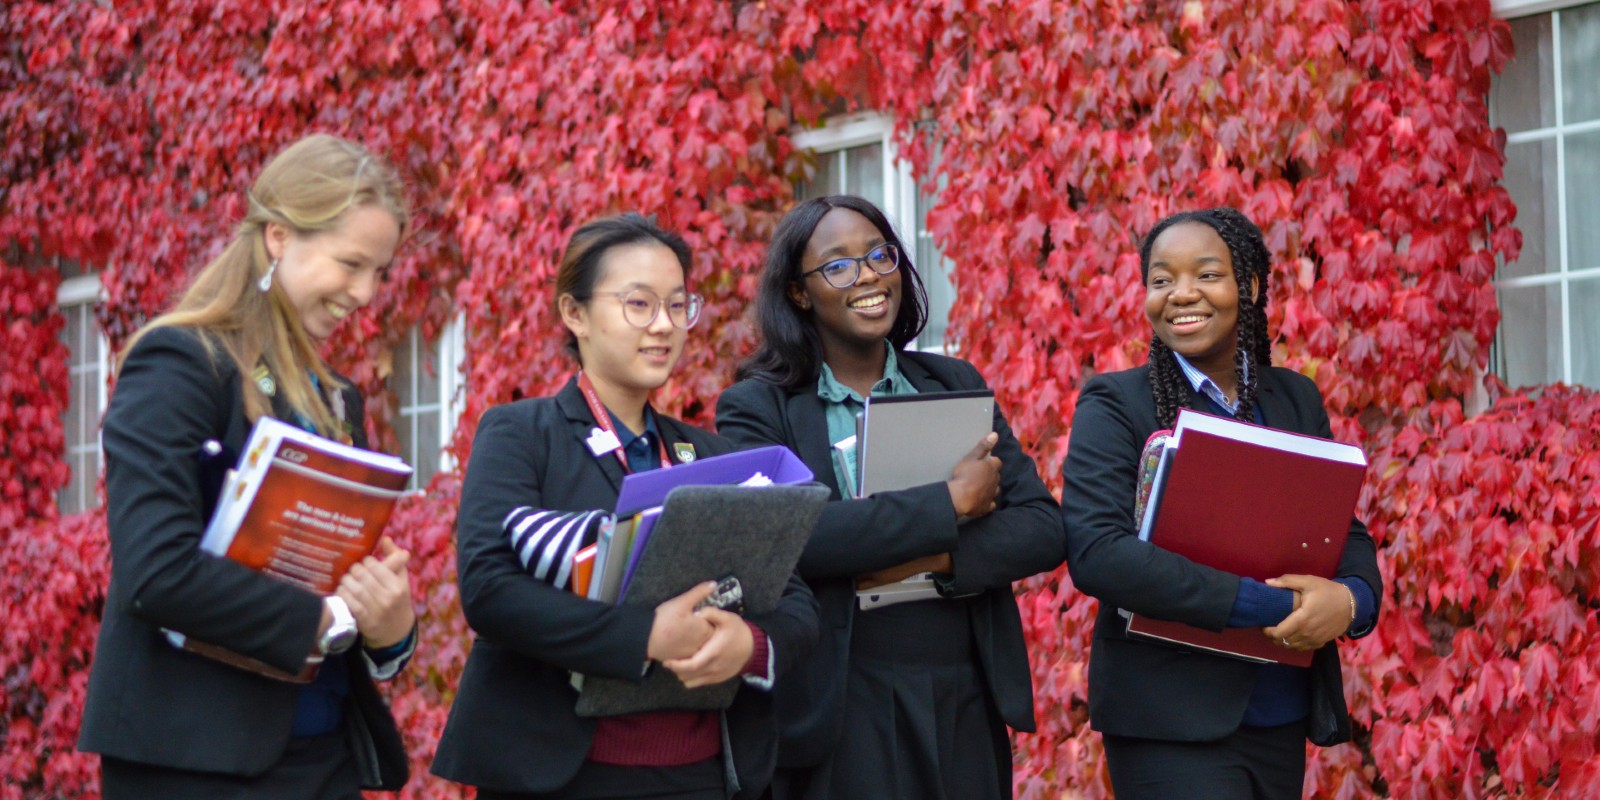 Downe House girls with leaf backdrop